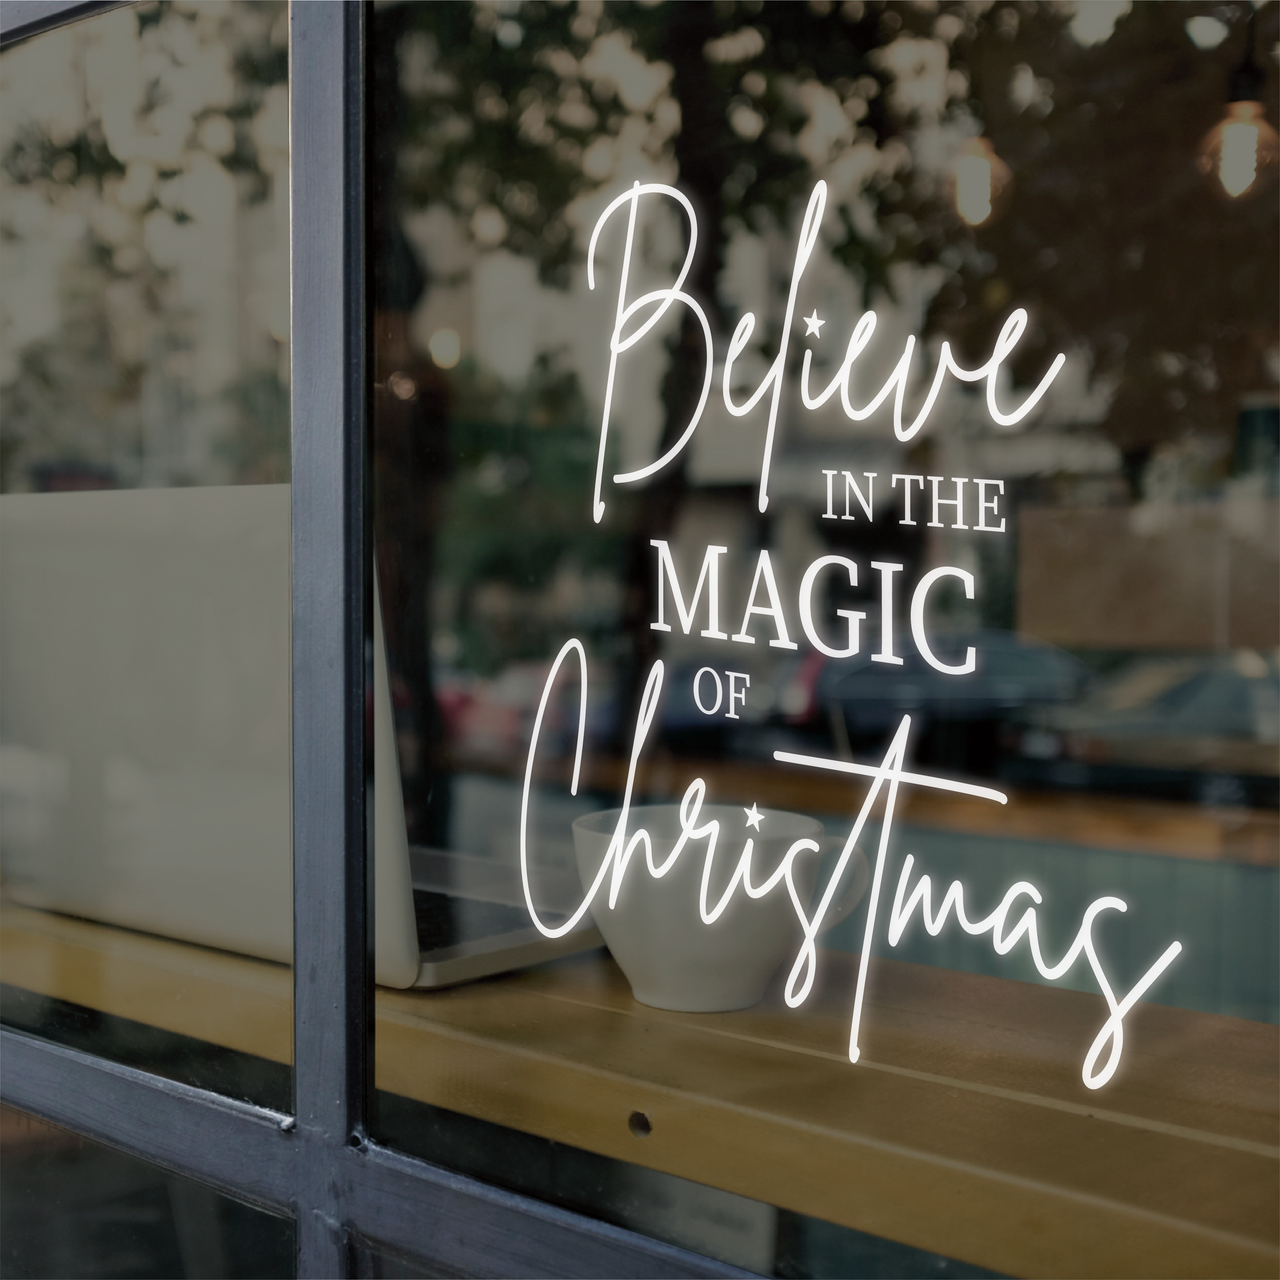 Believe in the Magic of Christmas - Festive Wall Decal